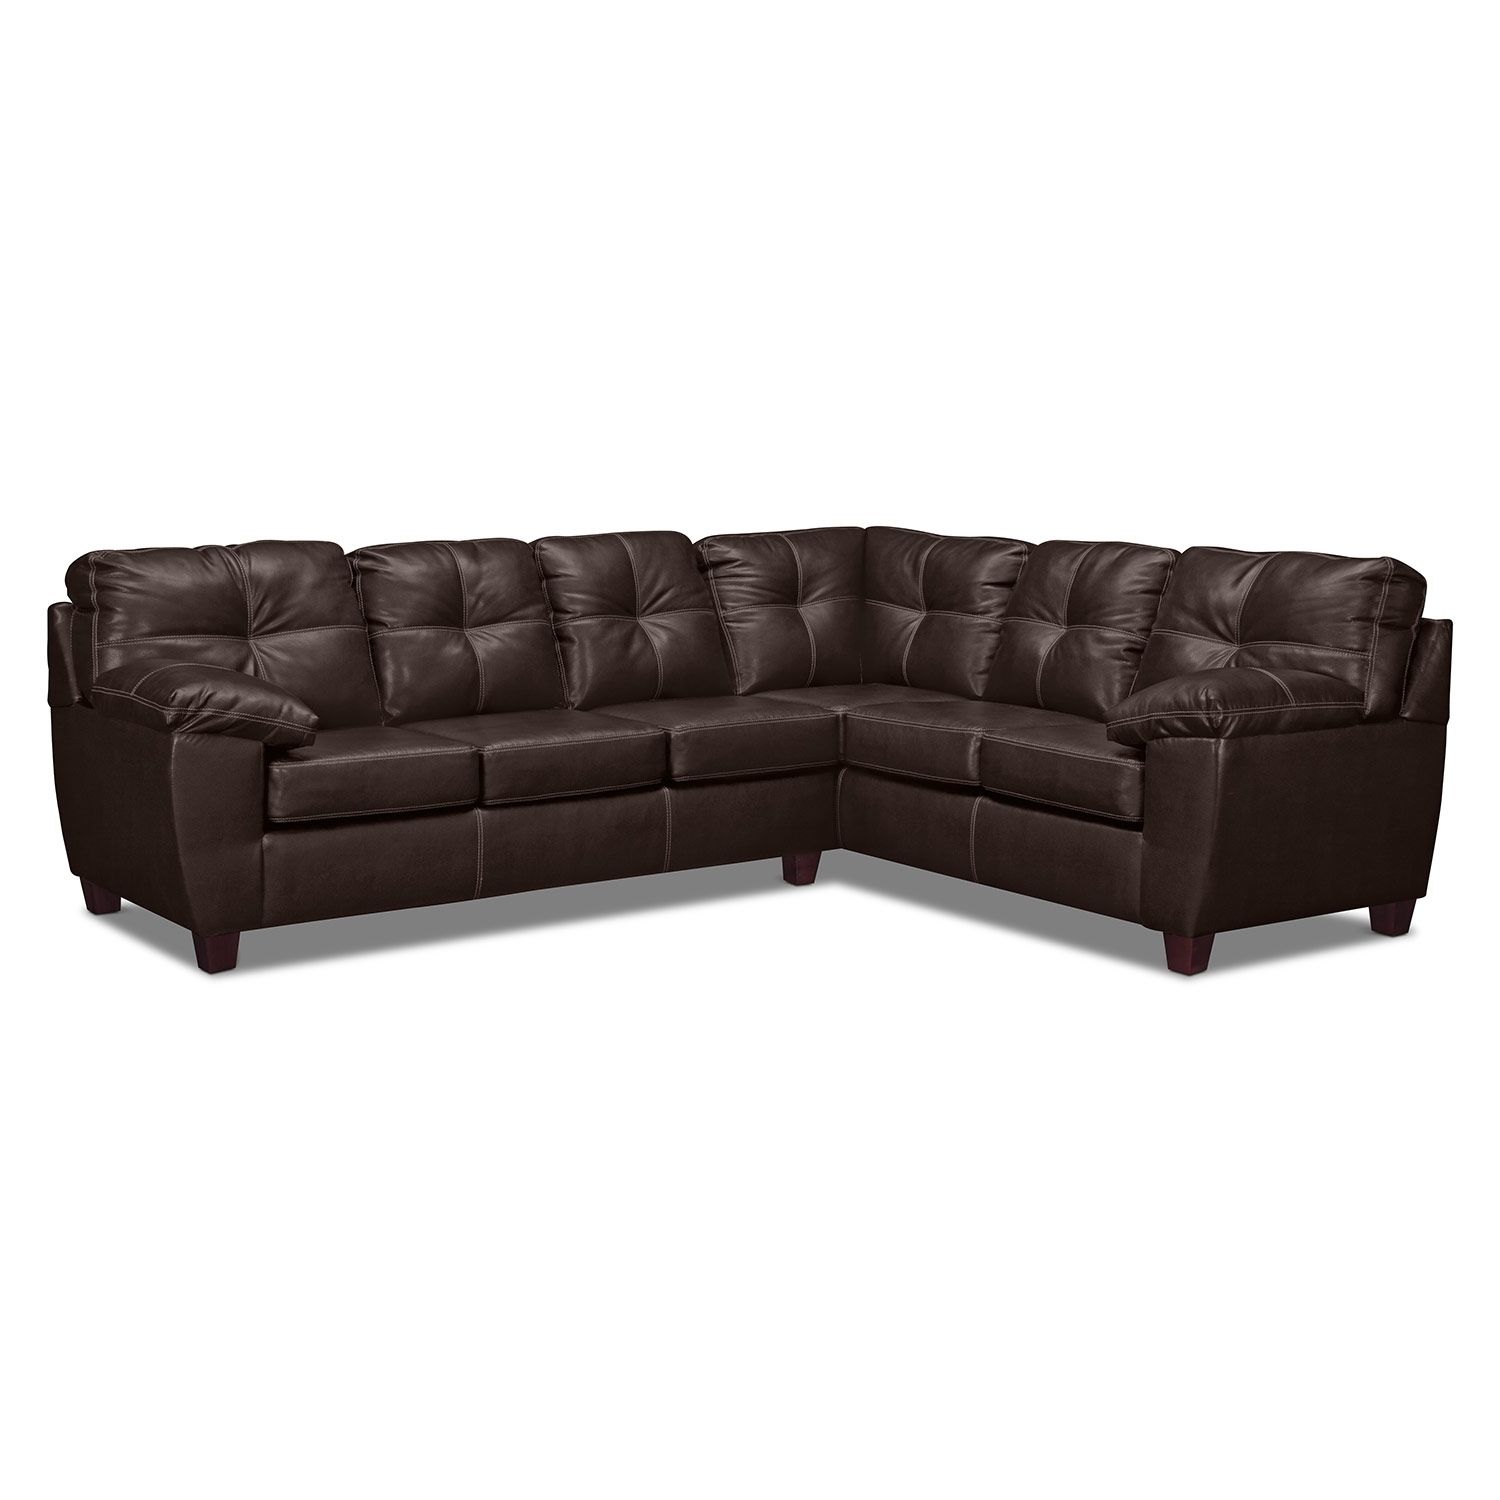 Modern Value City Sectional Sofa Factory Outlet Home Furniture Sofas Within Value City Sectional Sofas (View 6 of 10)